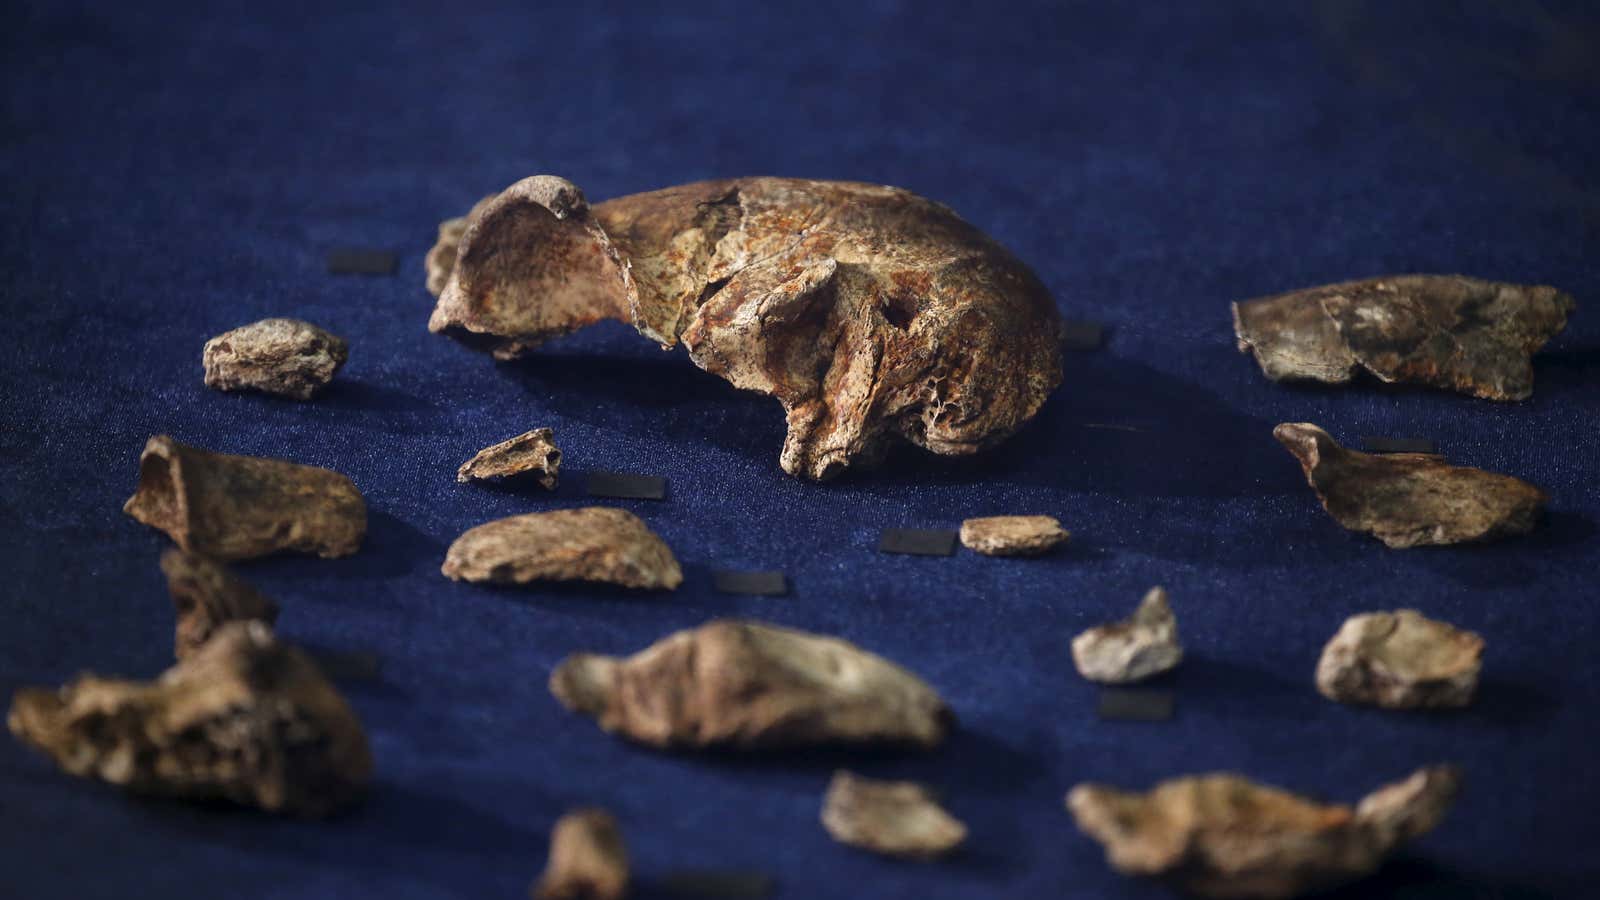 Ancient skeletons can reveal the history of migration.